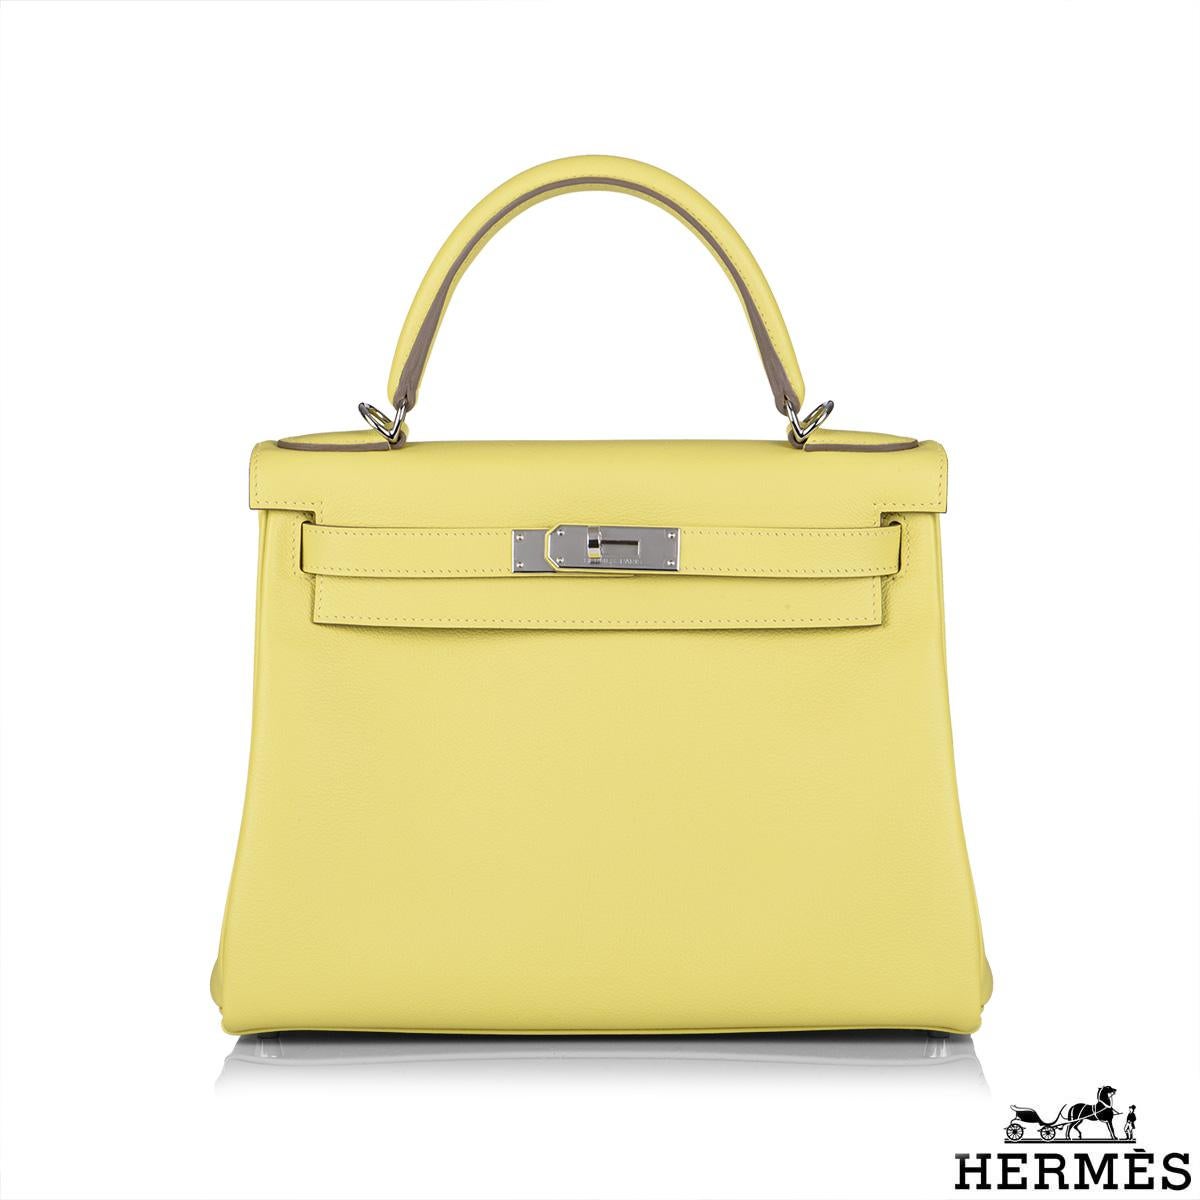 An exquisite Hermès Kelly II Lime Retourne 28cm Handbag. The vivid lime evercolour calfskin leather bag is detailed with palladium hardware. The exterior of this Kelly features a Retourne style in lime calfskin leather. It has a front toggle